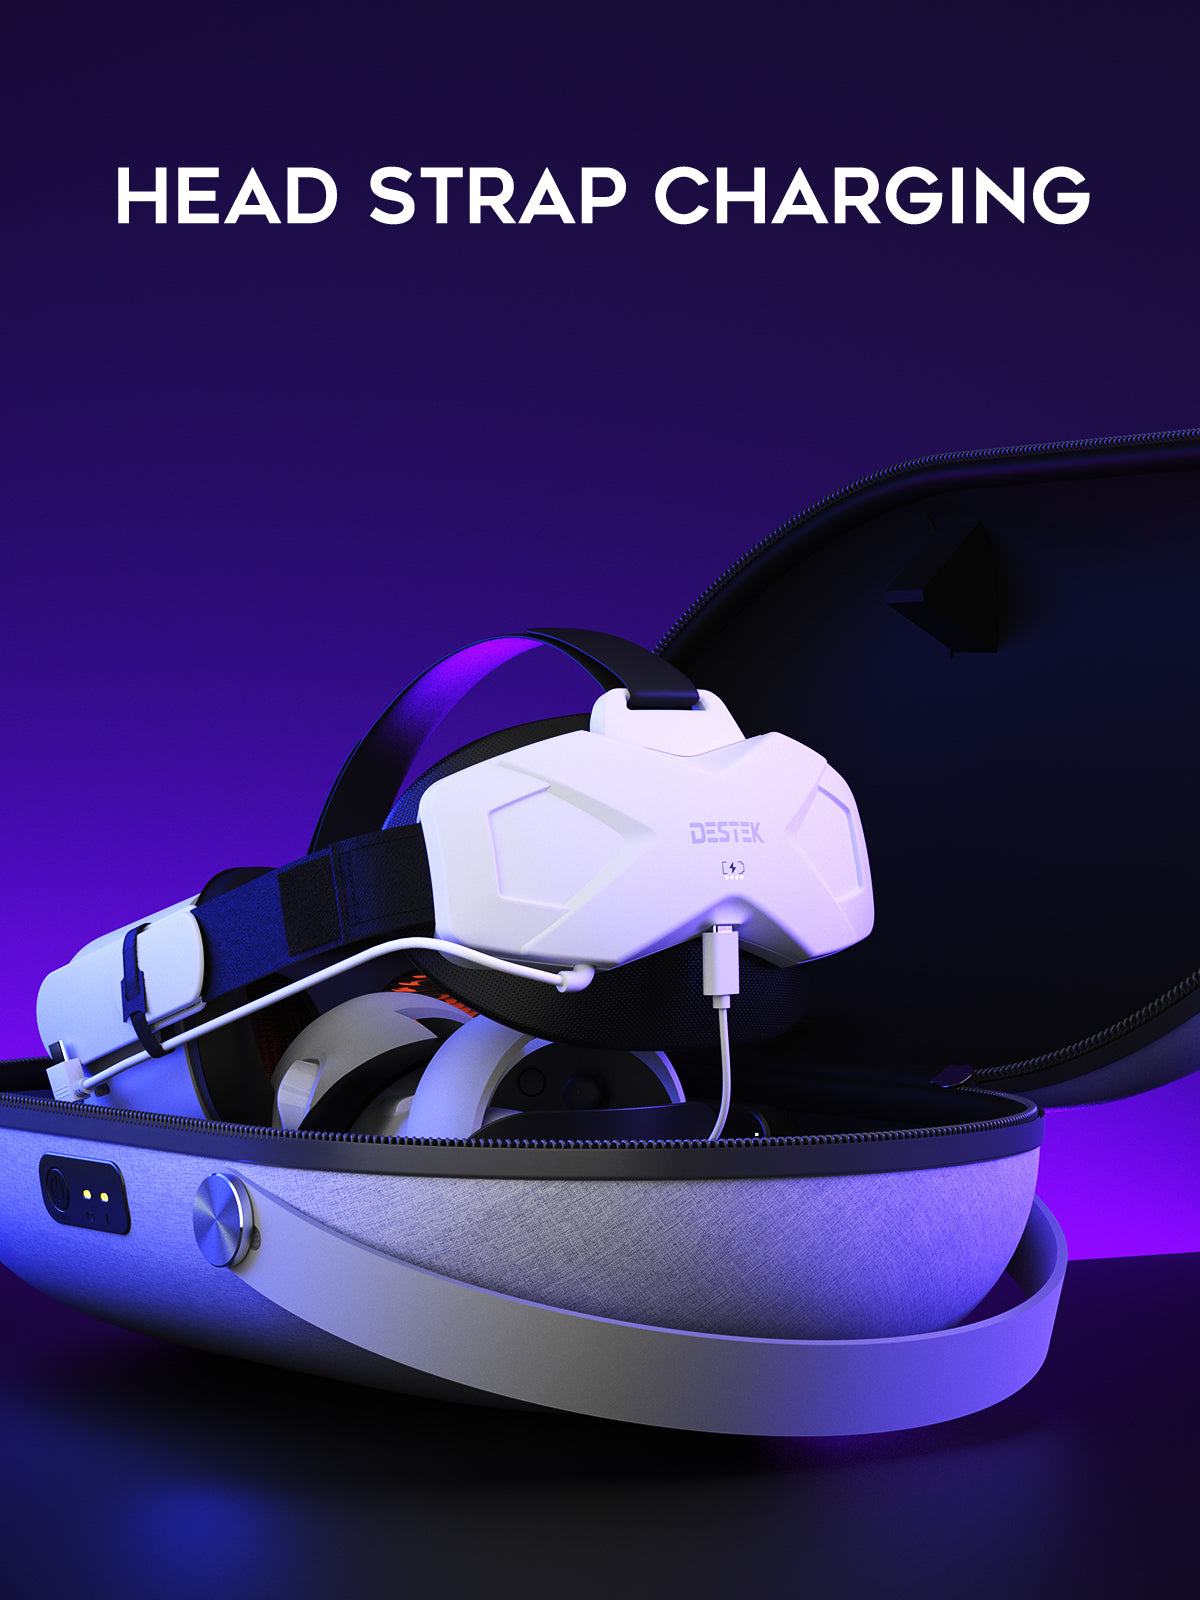 OC1 Carrying Case with Convenient Snap Charging, Compatible with Meta/Oculus Quest 2 & Elite Strap with Battery, Out of the Case and Play - Fabric Version